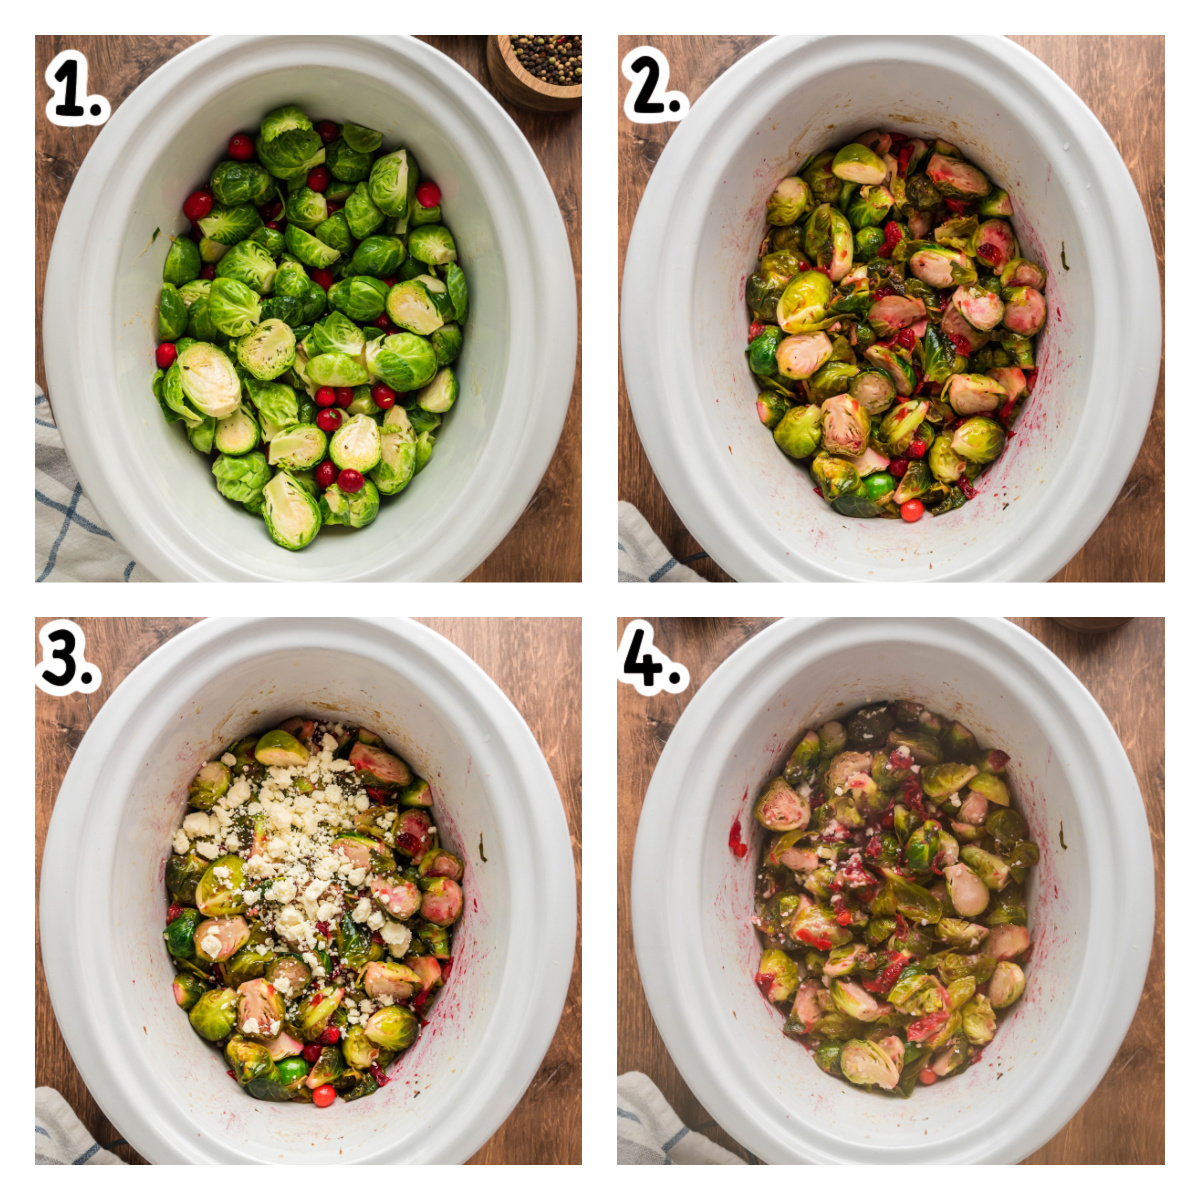 Four images showing how to make brussels sprouts in a slow cooker.